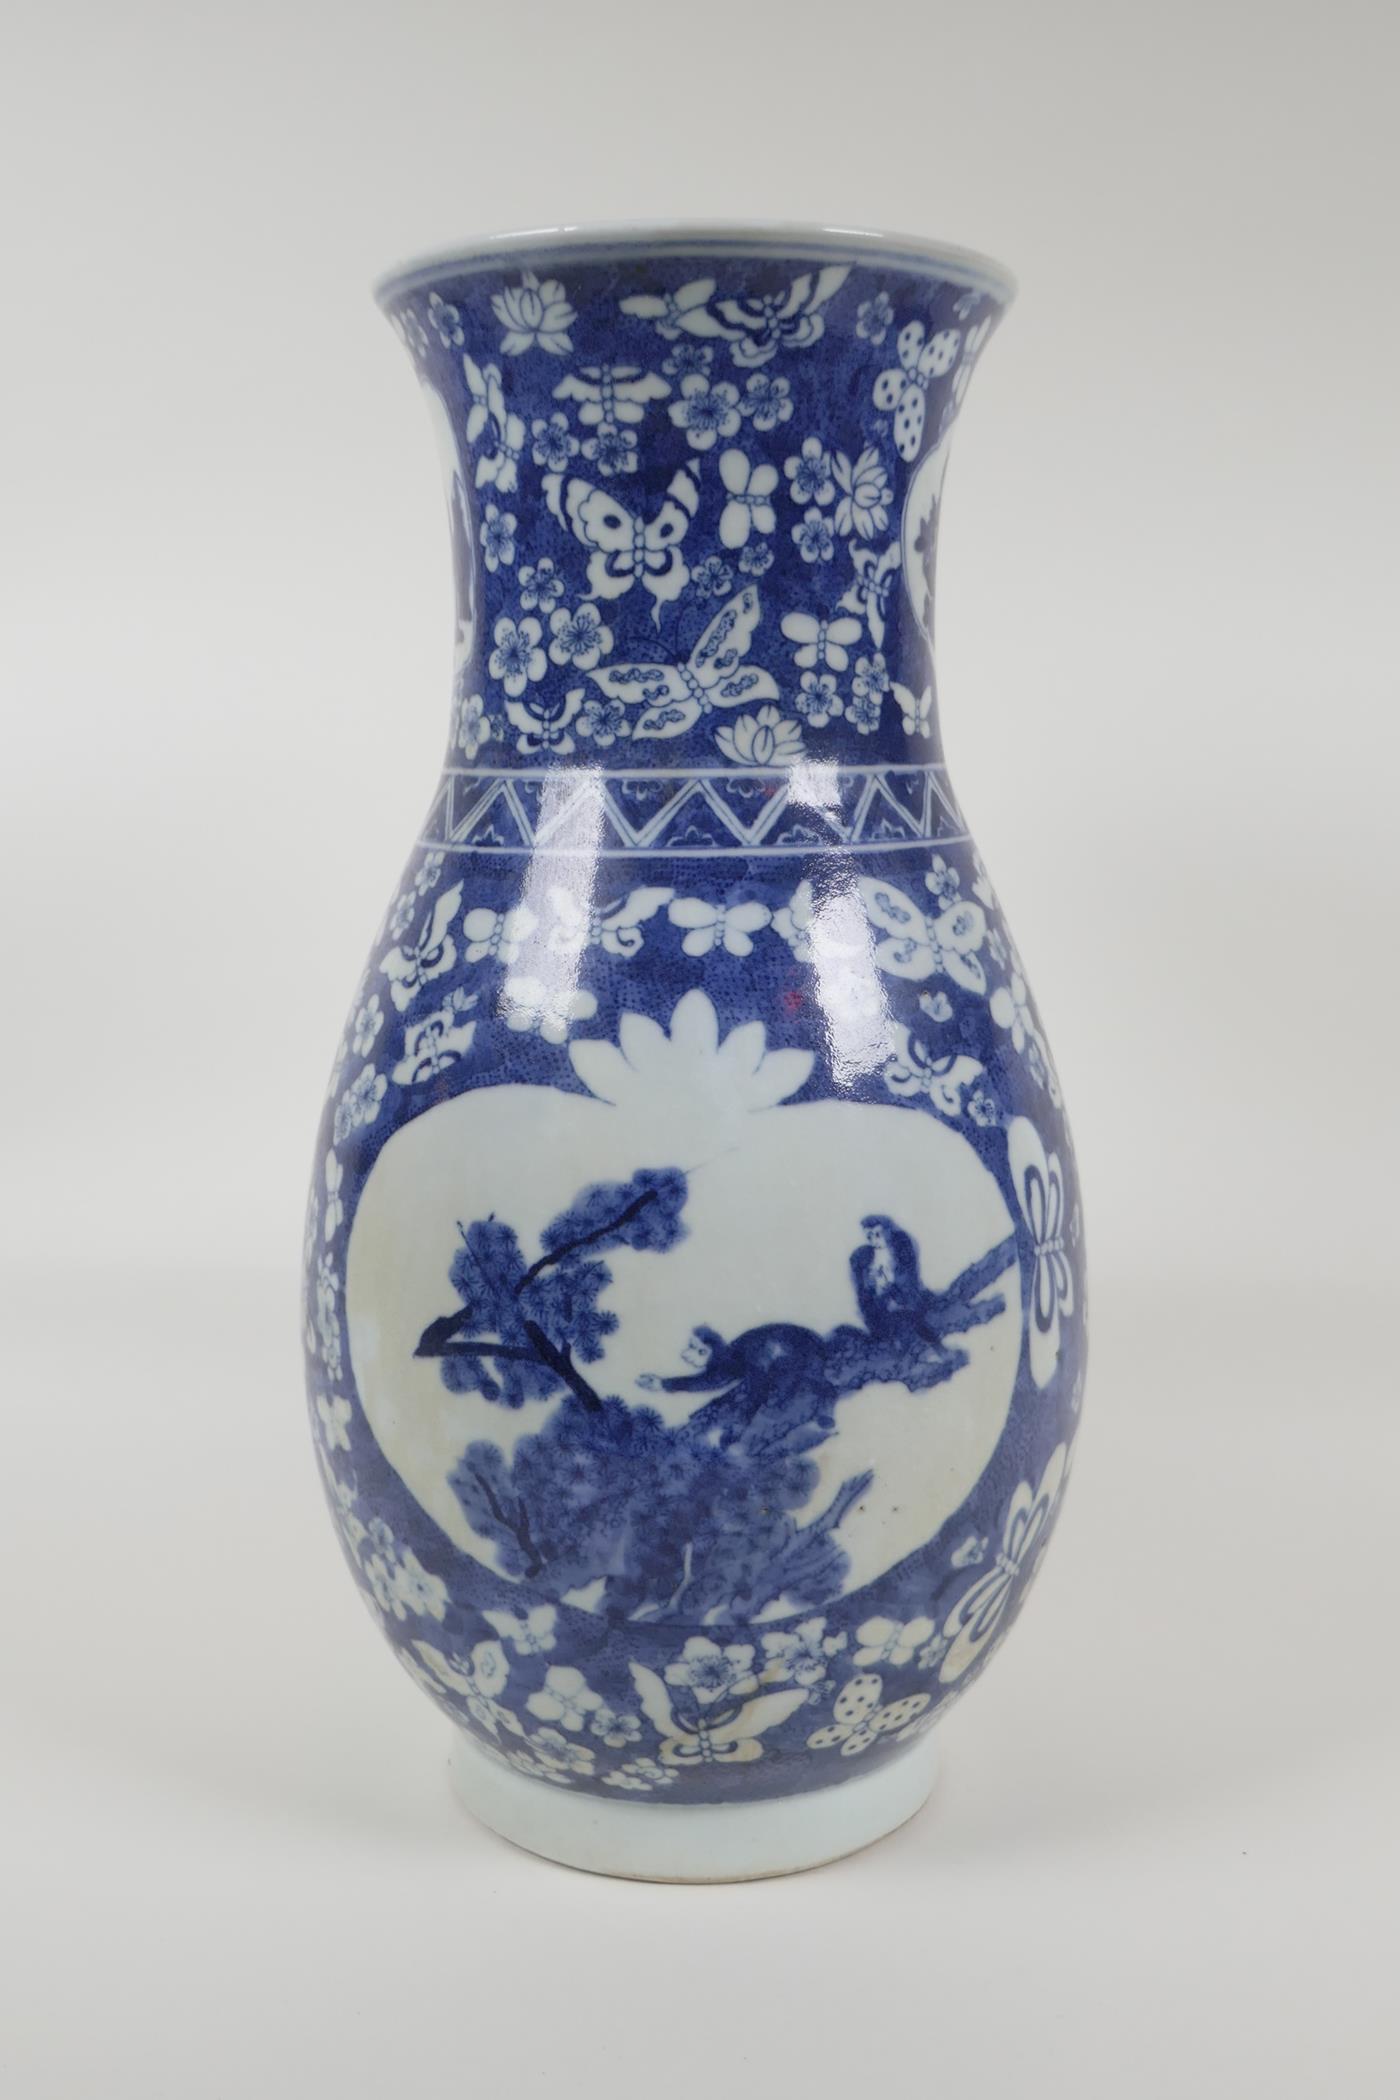 An early C20th Chinese blue and white porcelain vase with two decorative panels depicting birds